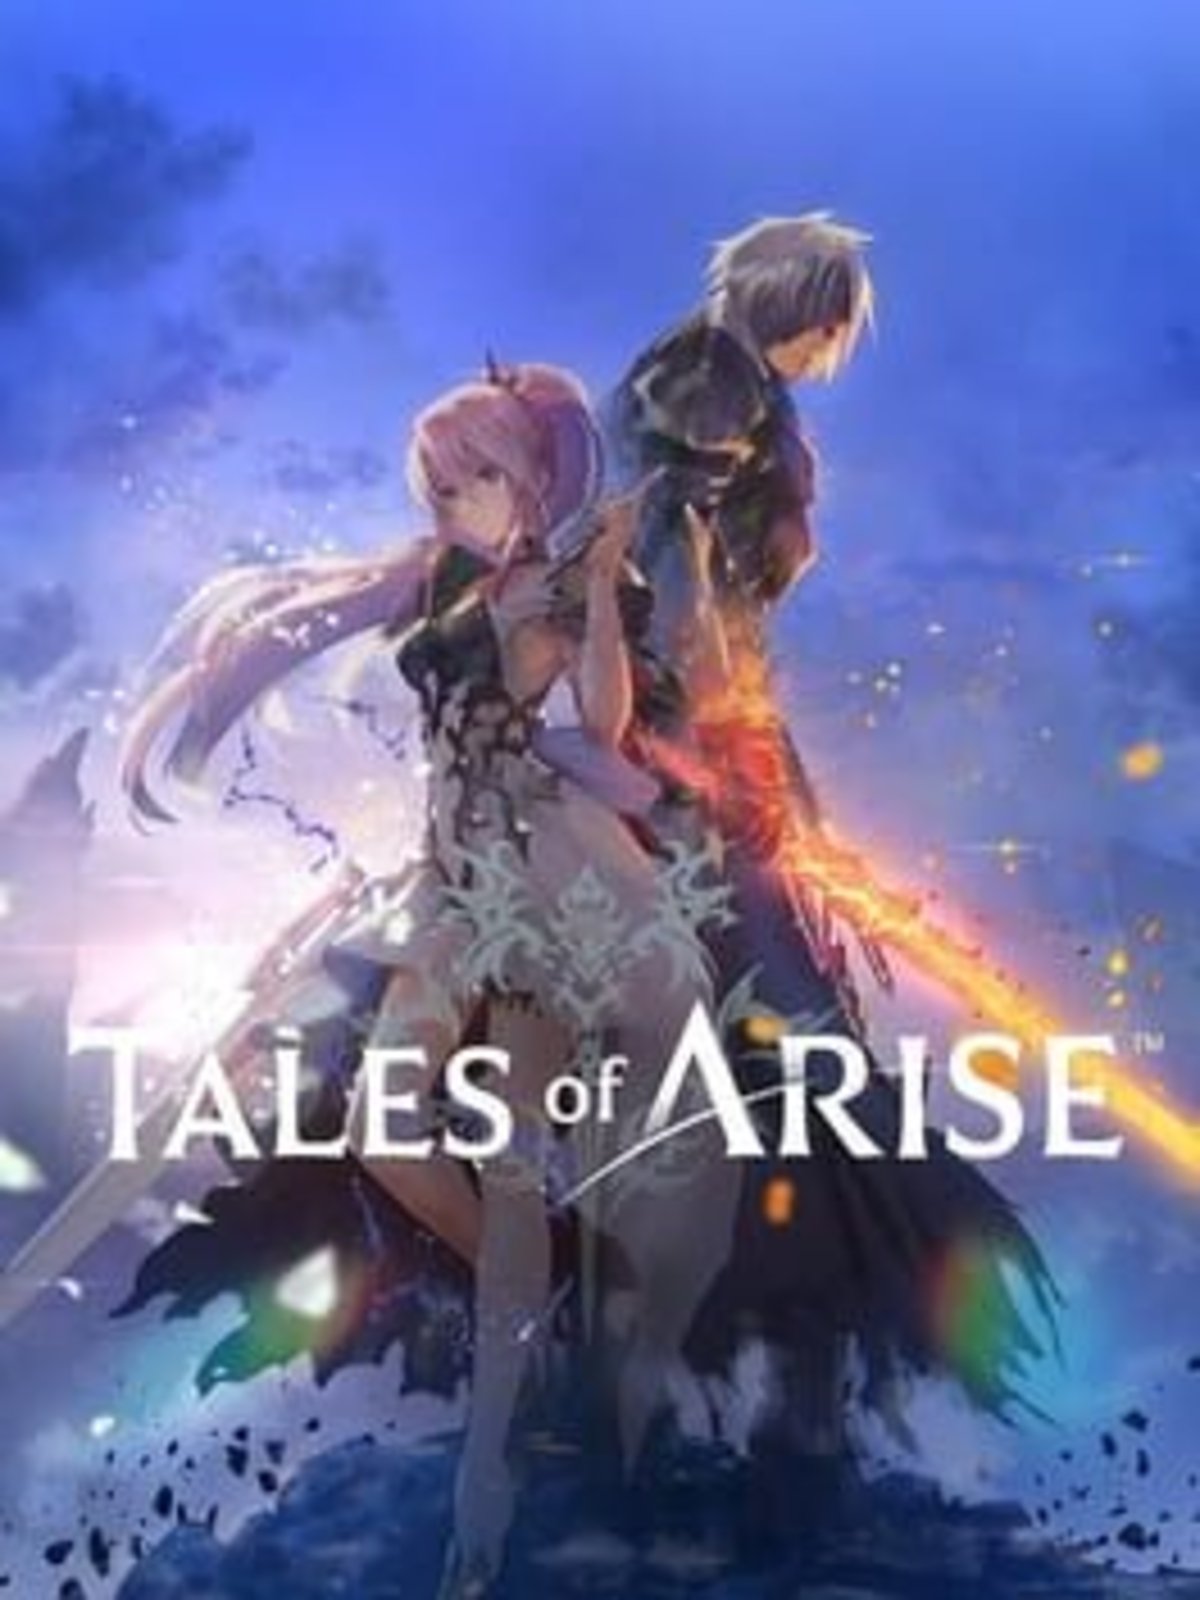 Tales of Arise shines in a new gameplay that includes a boss battle